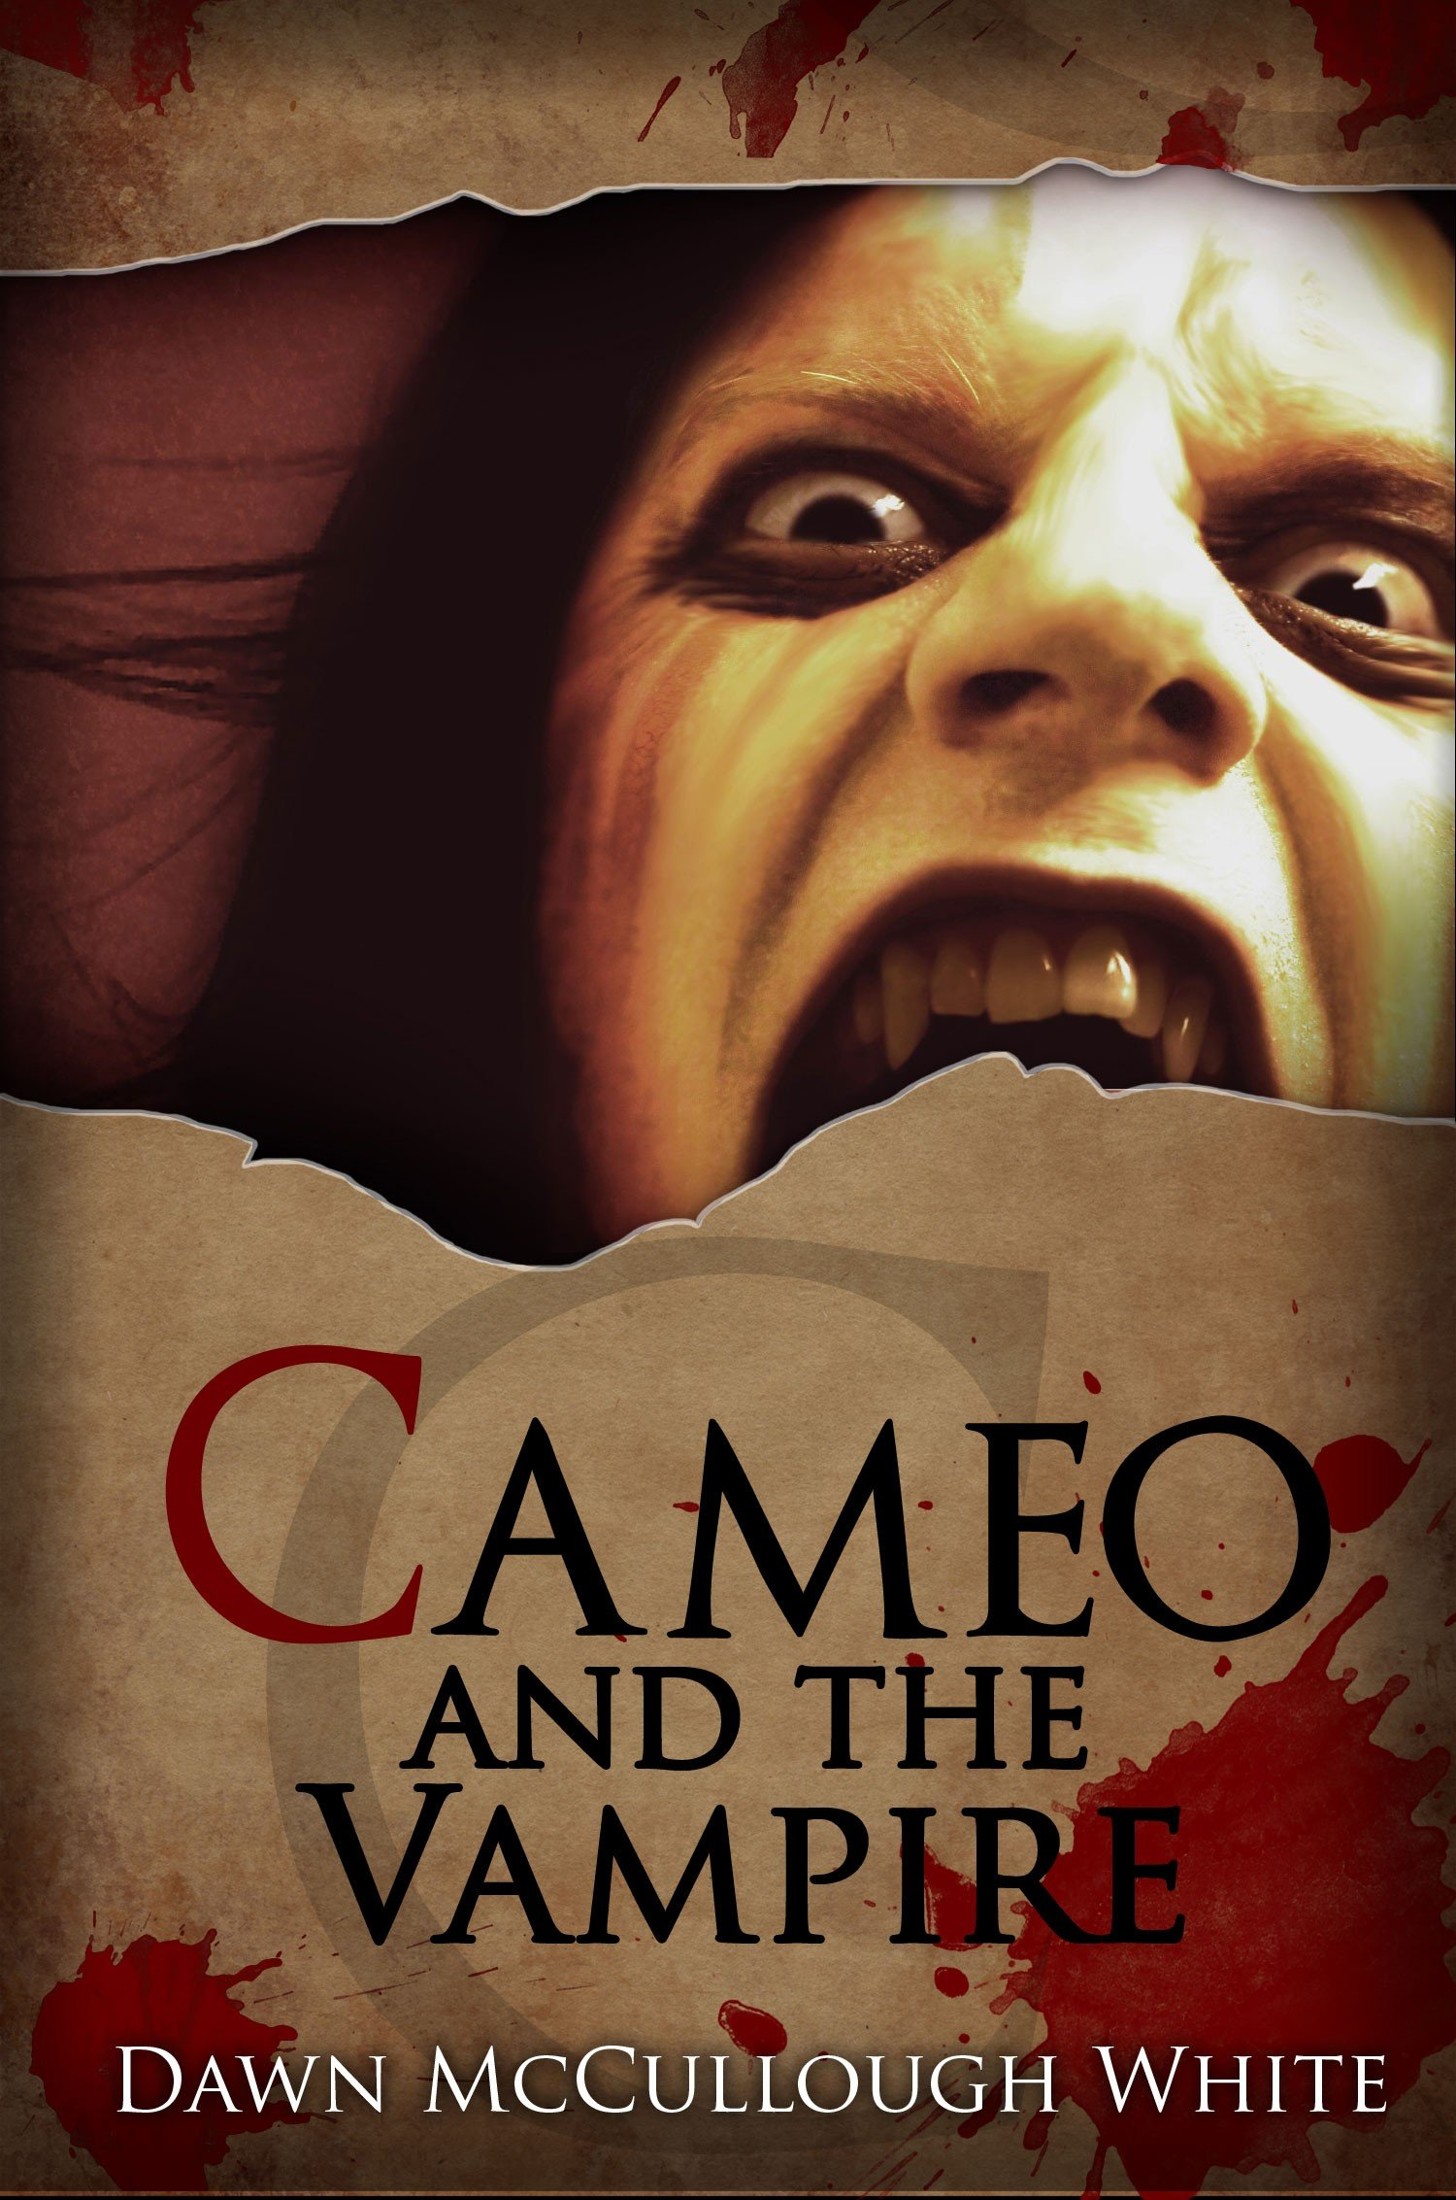 Cameo and the Vampire (Trilogy of Shadows Book 3)